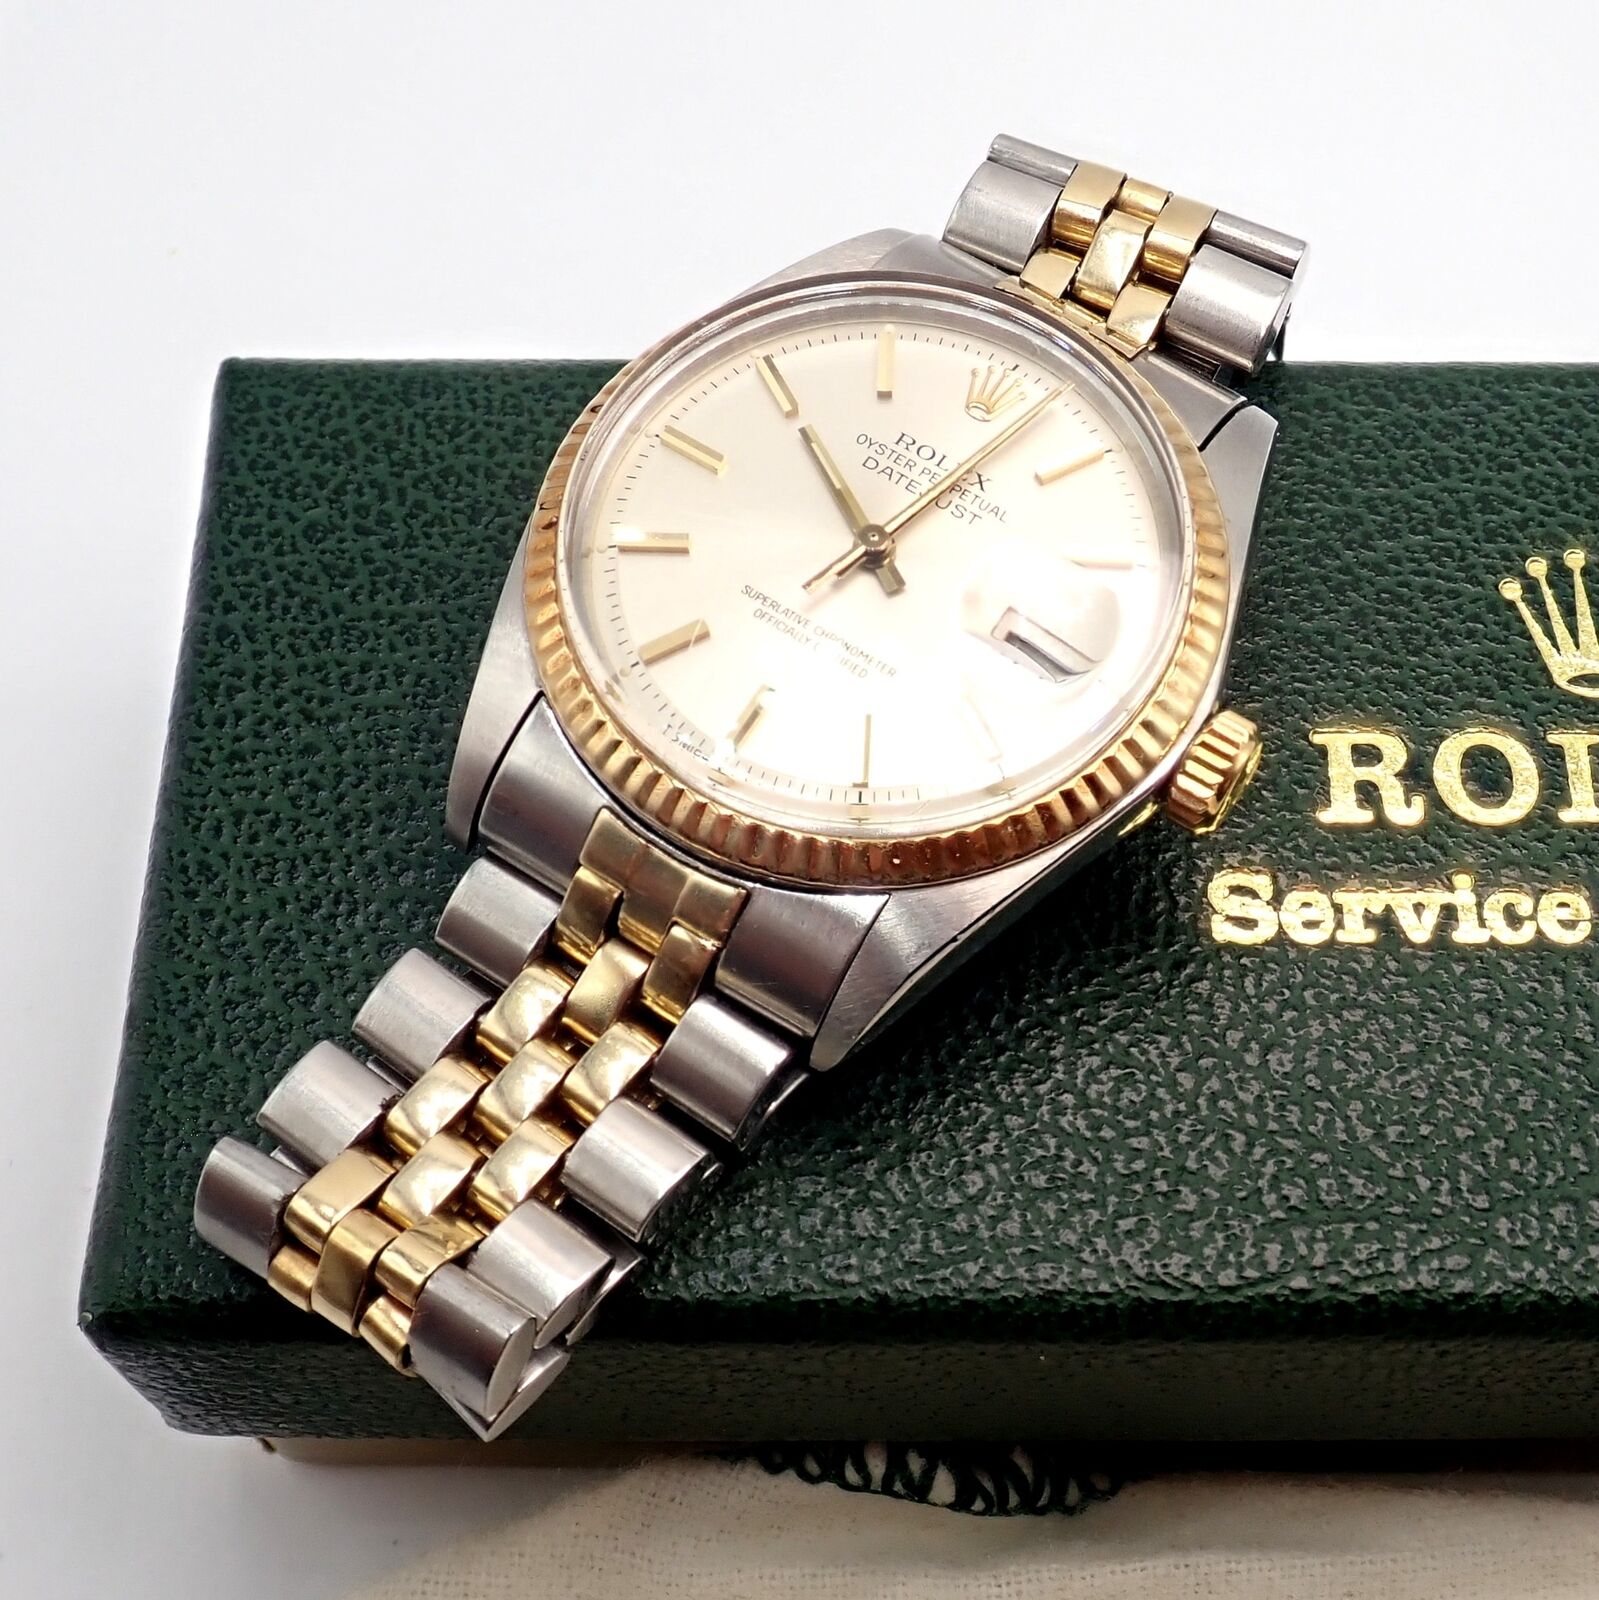 Rolex Jewelry & Watches:Watches, Parts & Accessories:Watches:Wristwatches Rolex Oyster Perpetual Watch Datejust 36mm Stainless 18K Gold Jubilee Band Mens